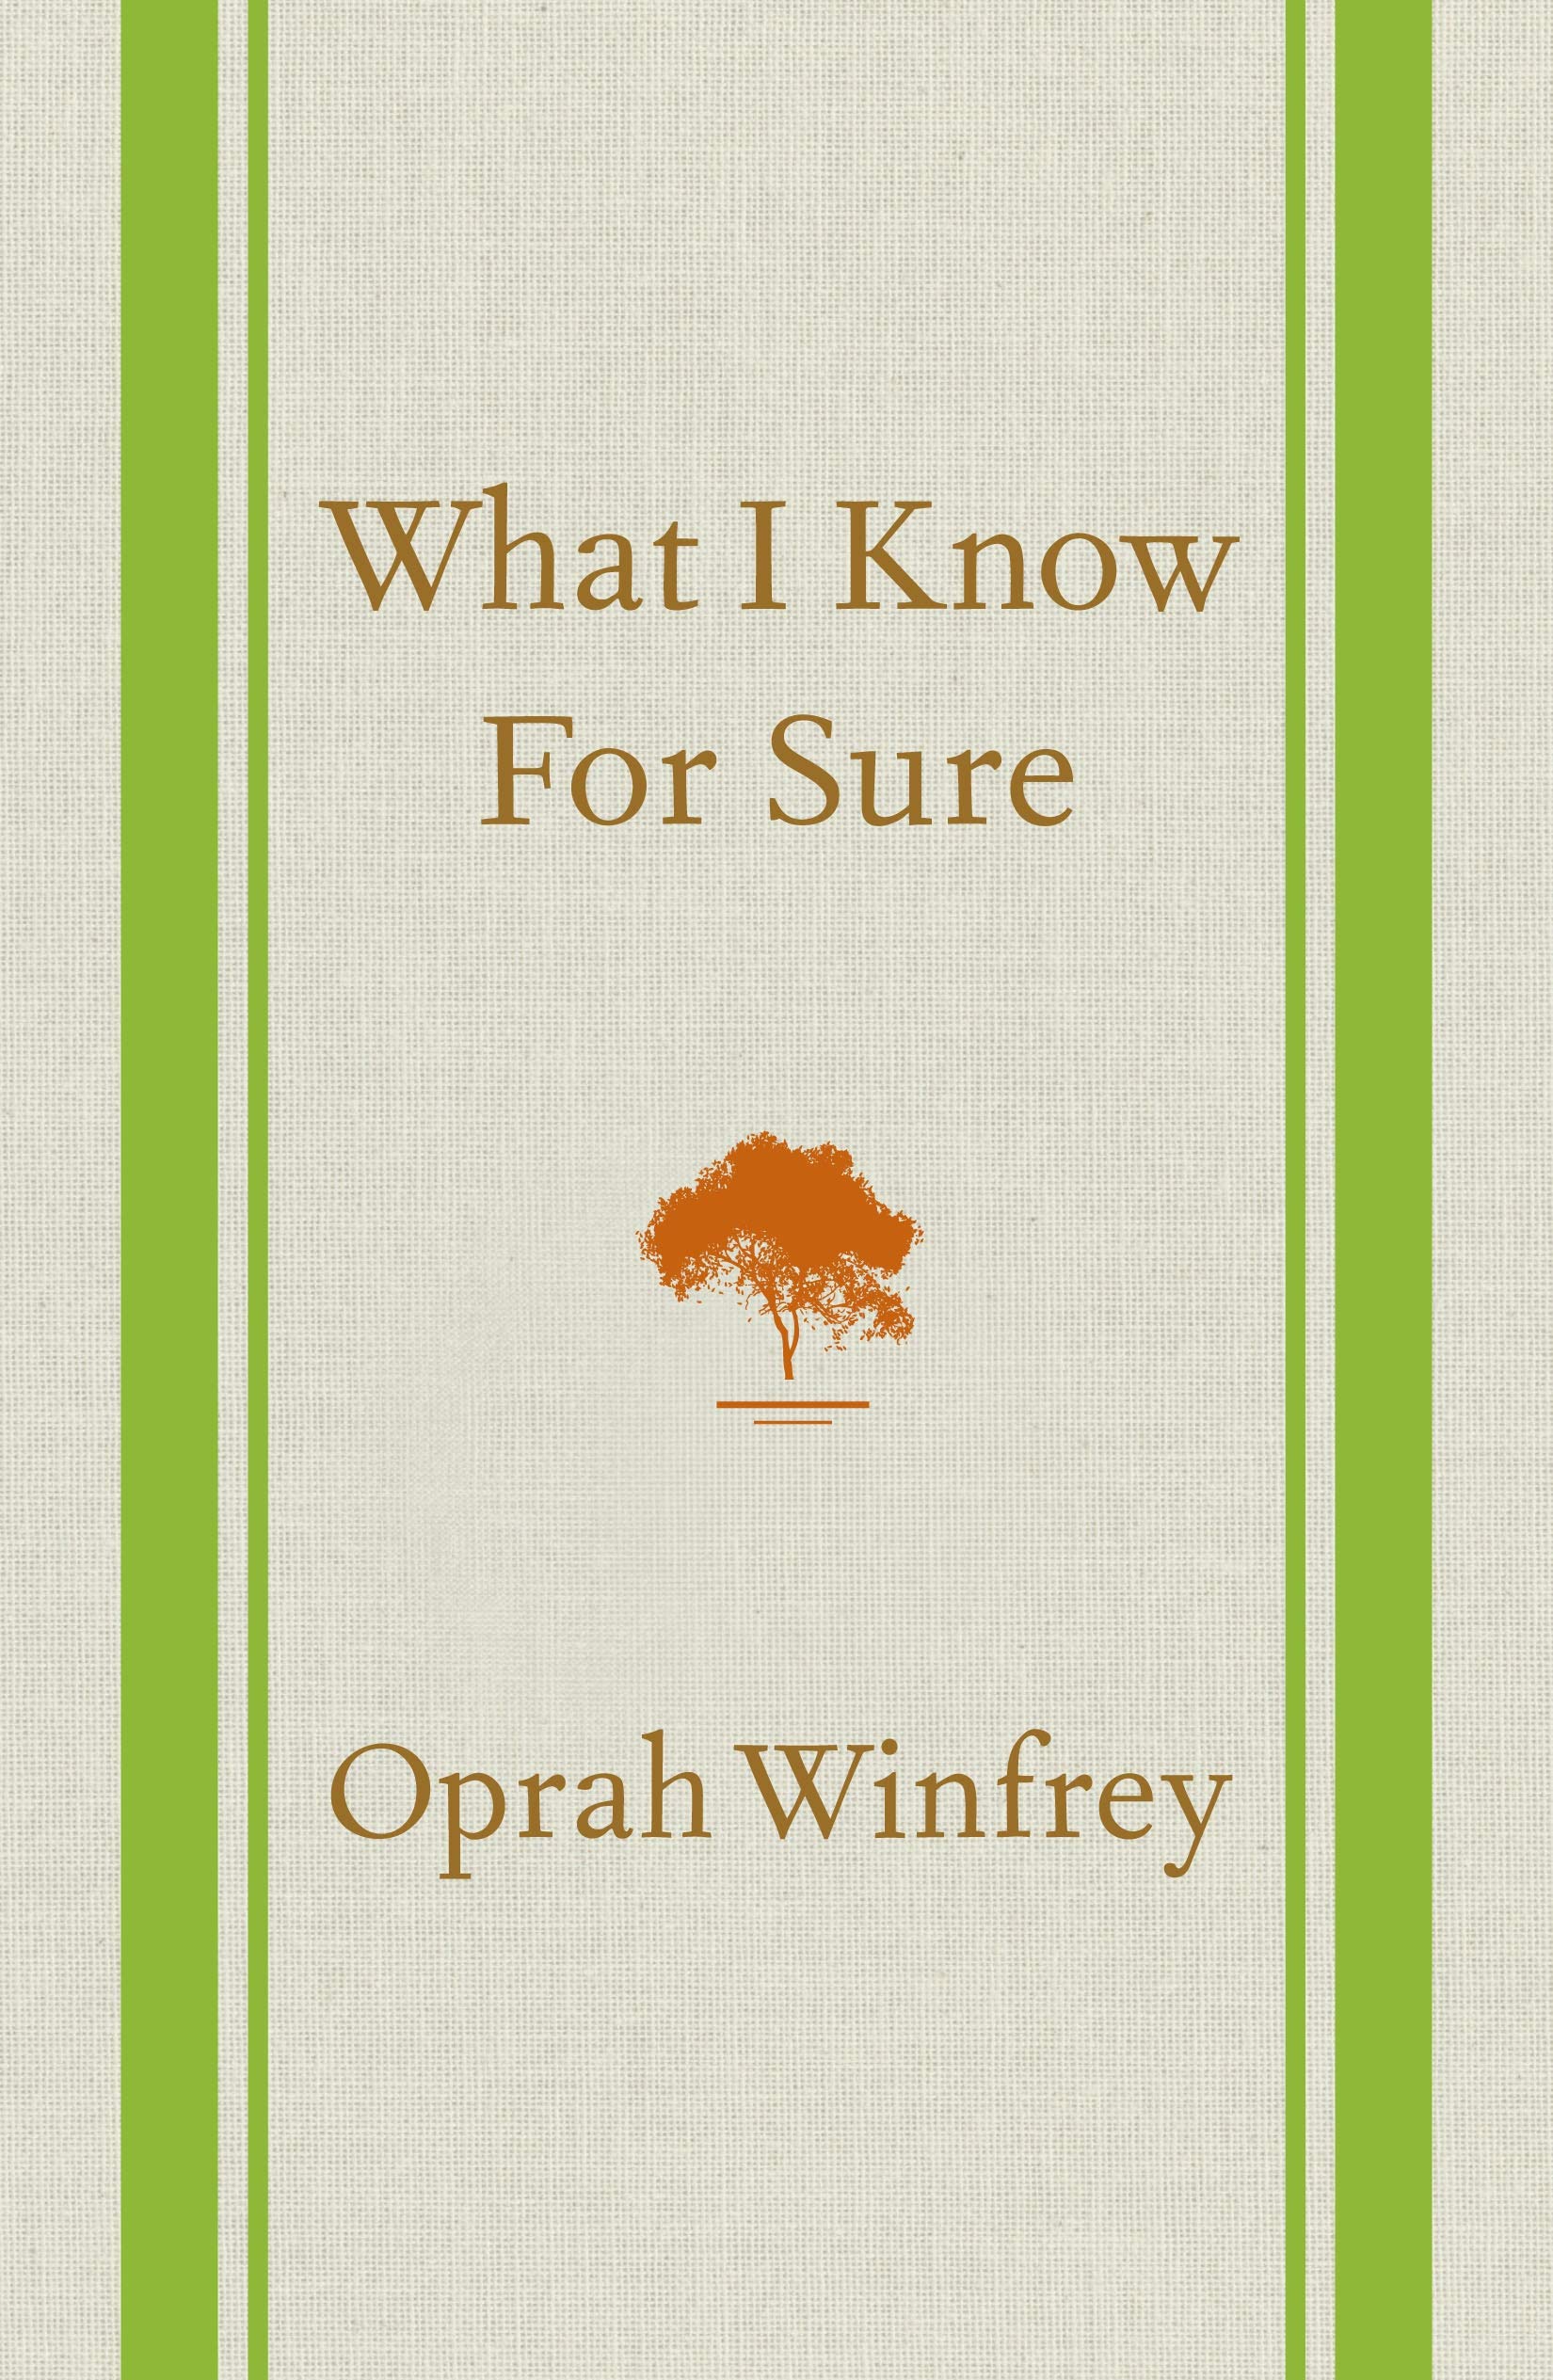 Book: What I Know for Sure Writer: Oprah Winfrey